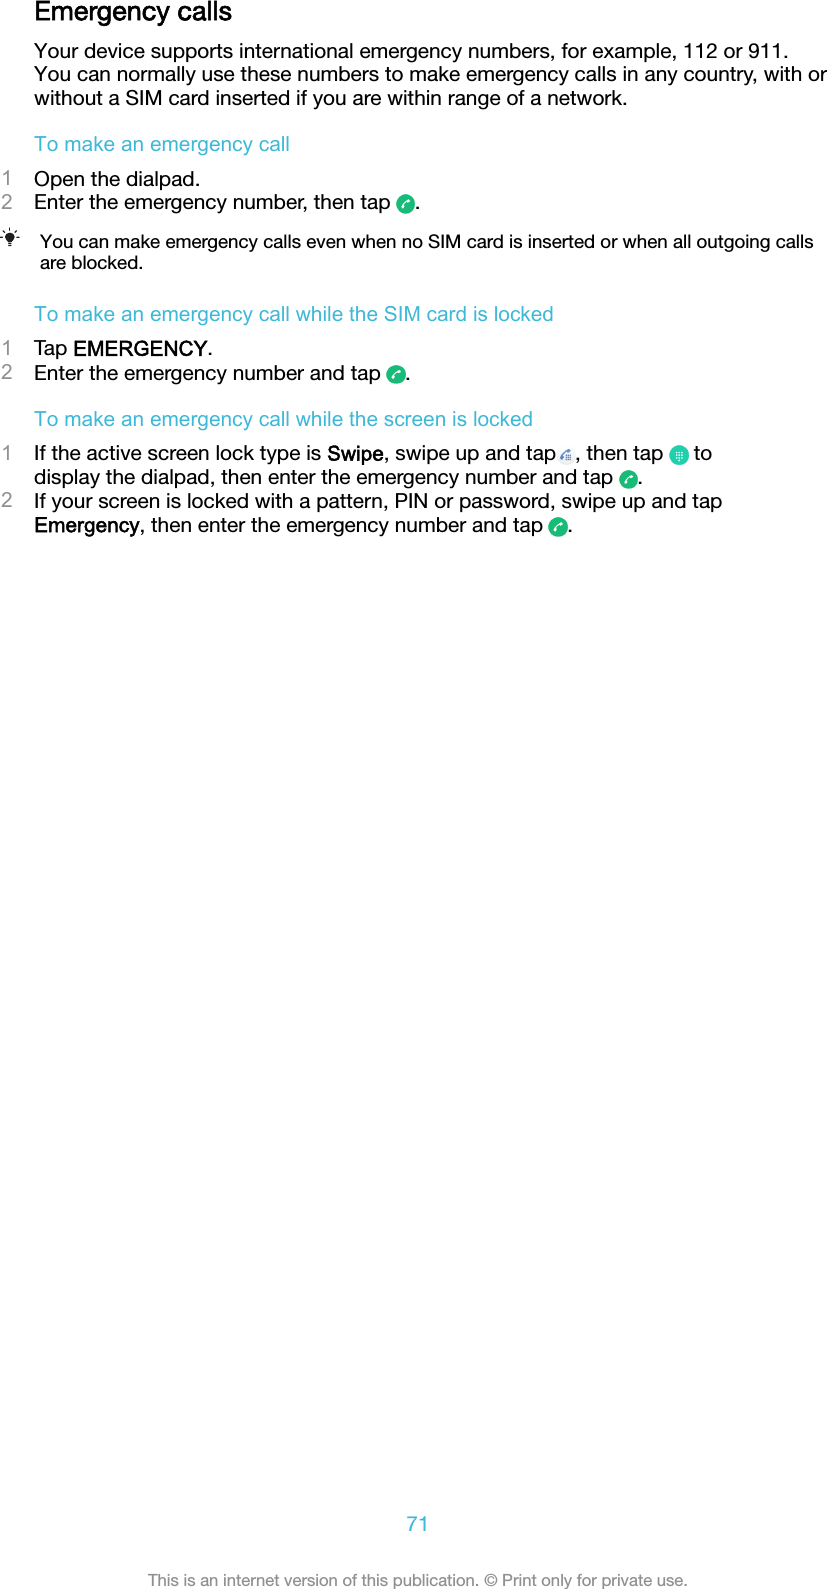 Emergency callsYour device supports international emergency numbers, for example, 112 or 911.You can normally use these numbers to make emergency calls in any country, with orwithout a SIM card inserted if you are within range of a network.To make an emergency call1Open the dialpad.2Enter the emergency number, then tap  .You can make emergency calls even when no SIM card is inserted or when all outgoing callsare blocked.To make an emergency call while the SIM card is locked1Tap EMERGENCY.2Enter the emergency number and tap  .To make an emergency call while the screen is locked1If the active screen lock type is Swipe, swipe up and tap , then tap   todisplay the dialpad, then enter the emergency number and tap  .2If your screen is locked with a pattern, PIN or password, swipe up and tapEmergency, then enter the emergency number and tap  .71This is an internet version of this publication. © Print only for private use.